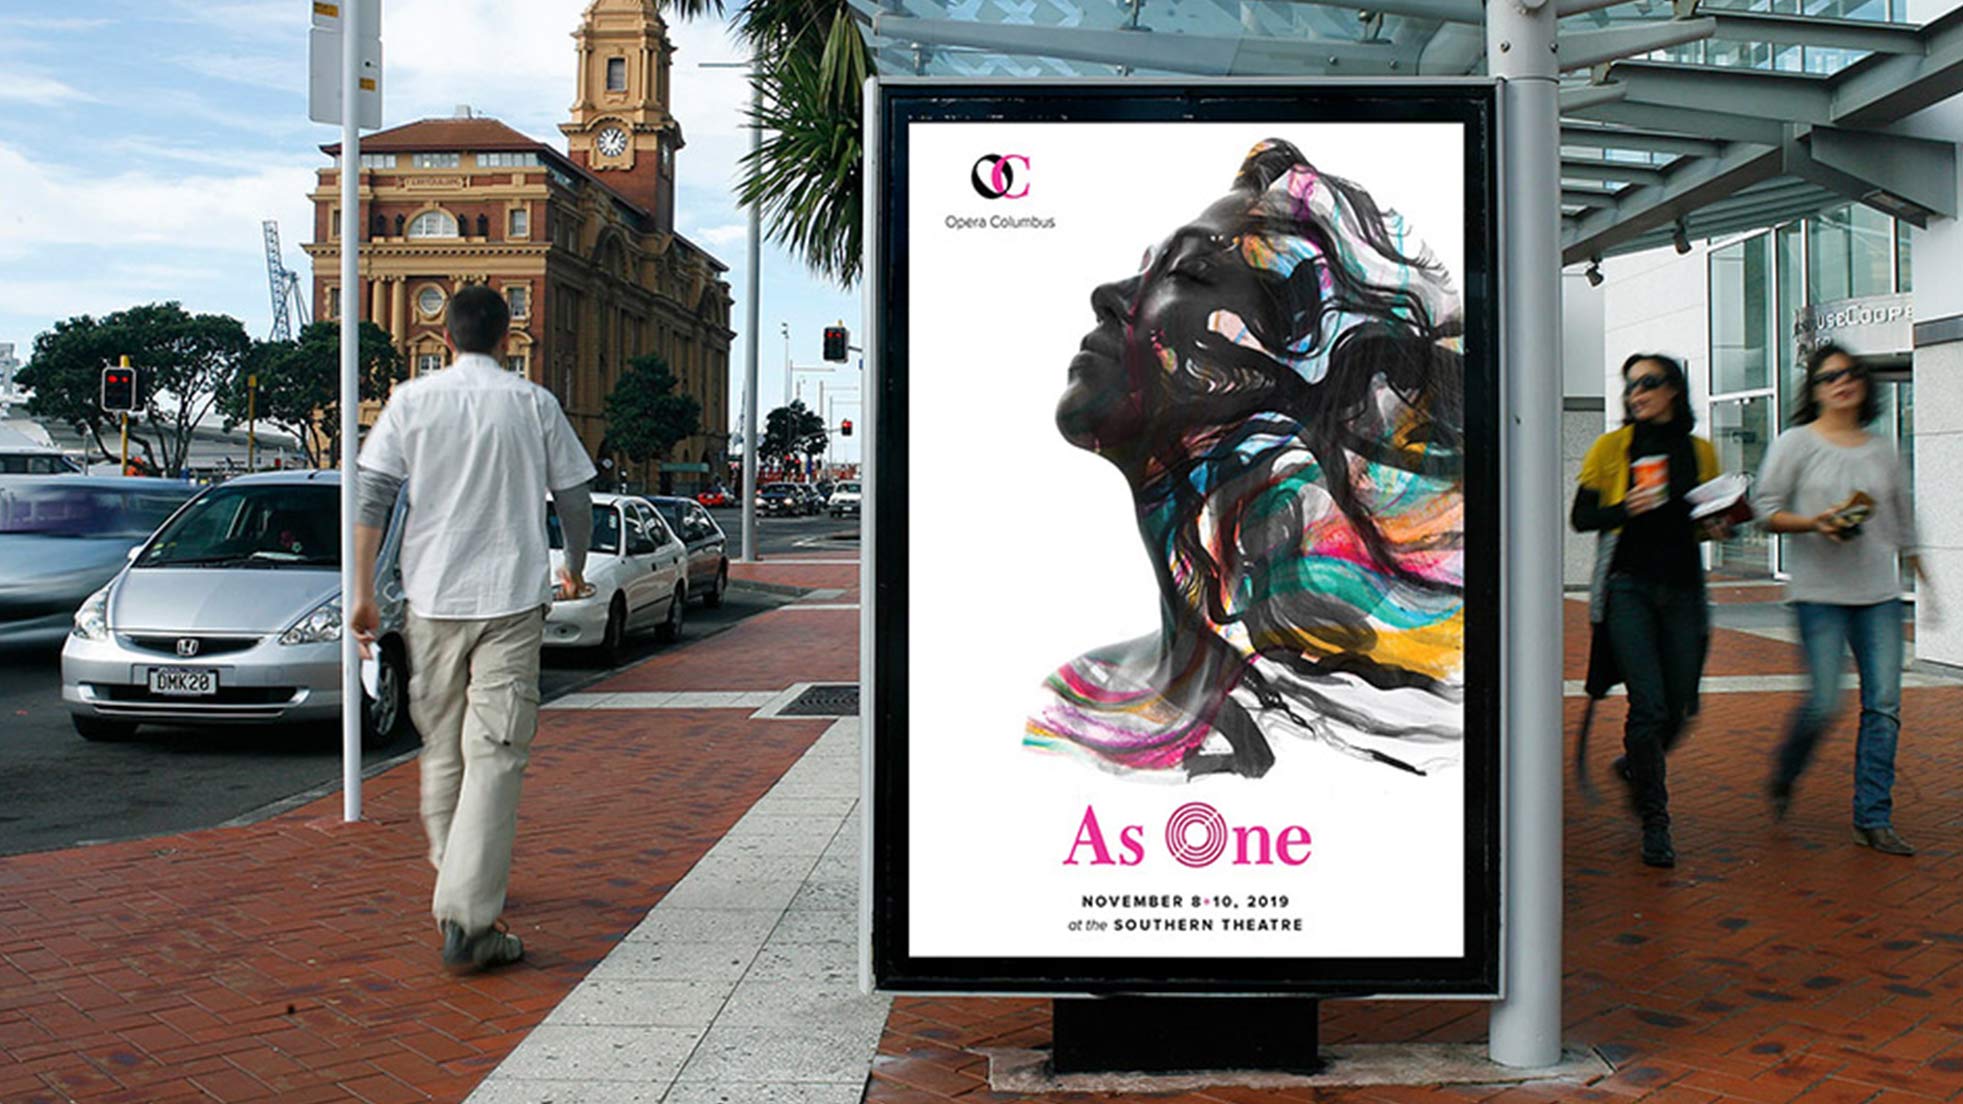 Production of AS ONE, Artwork from show on billboard